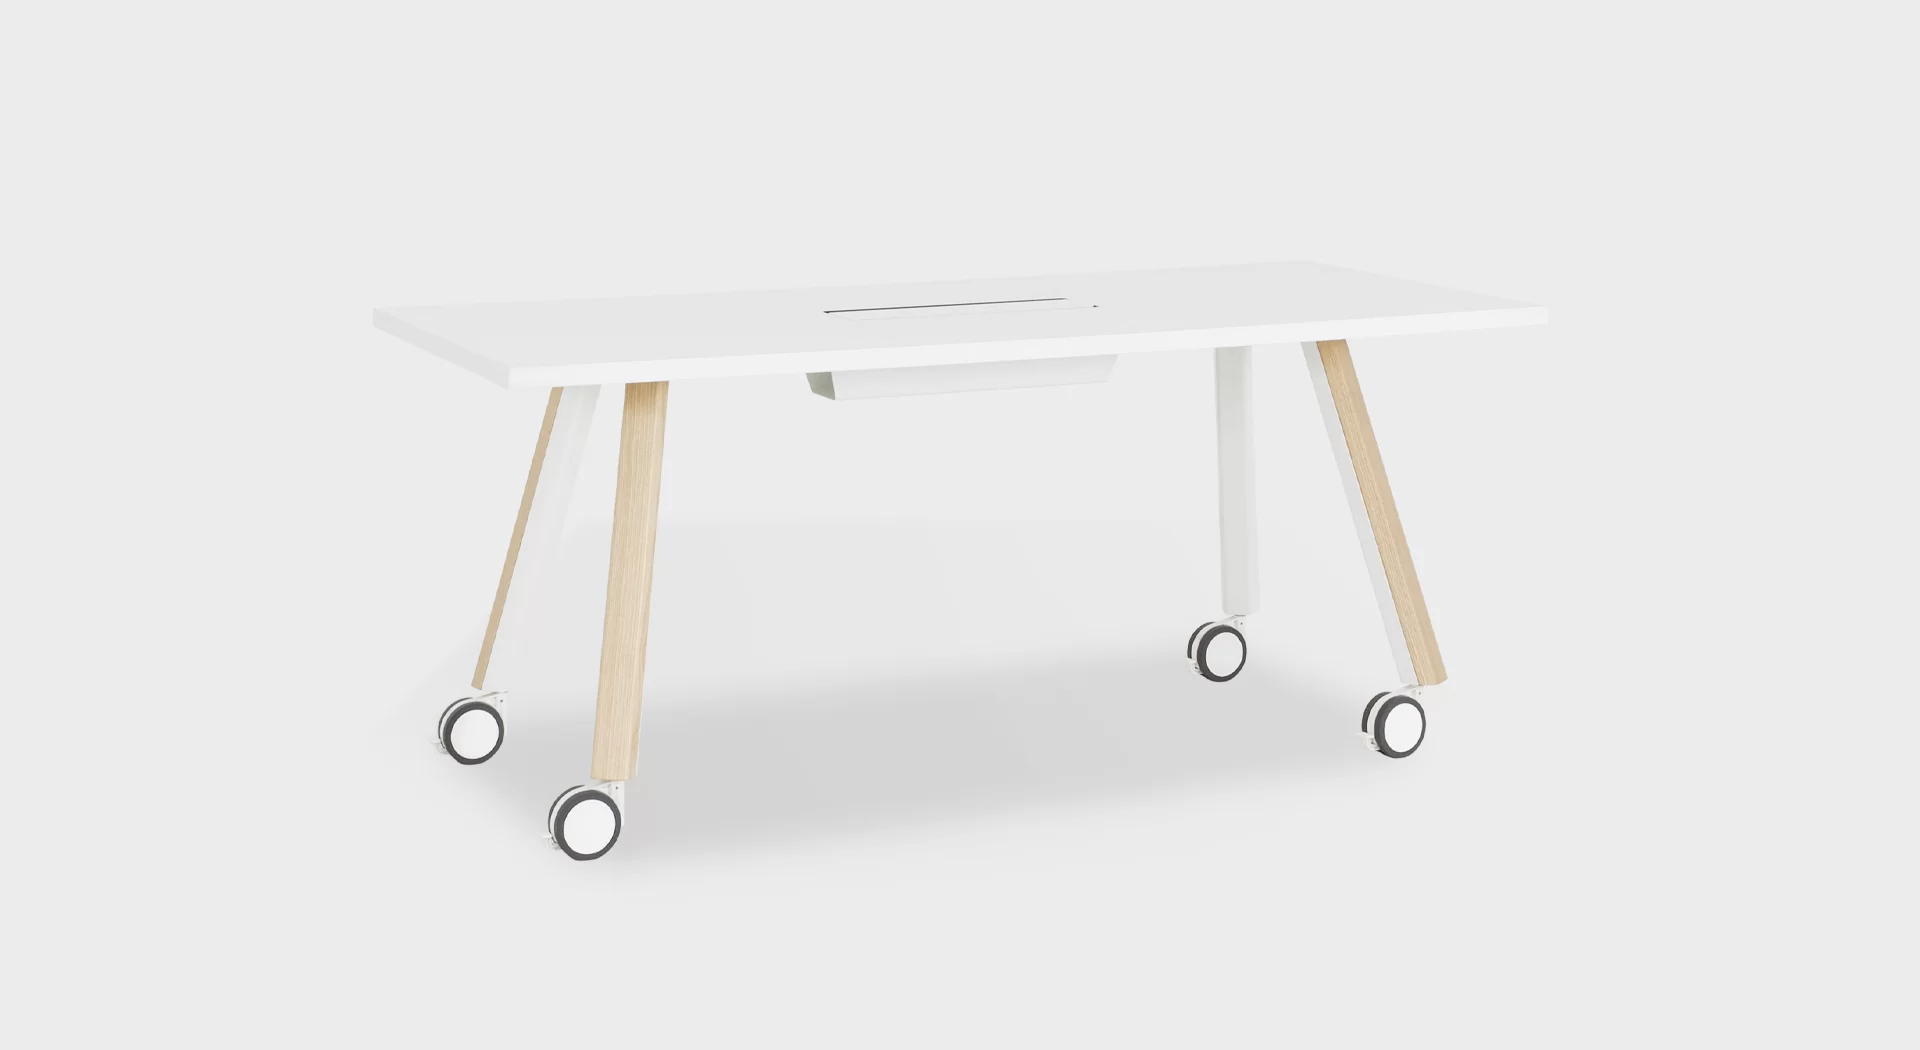 Ori Dining Table conference from lapalma, designed by Romano Marcato